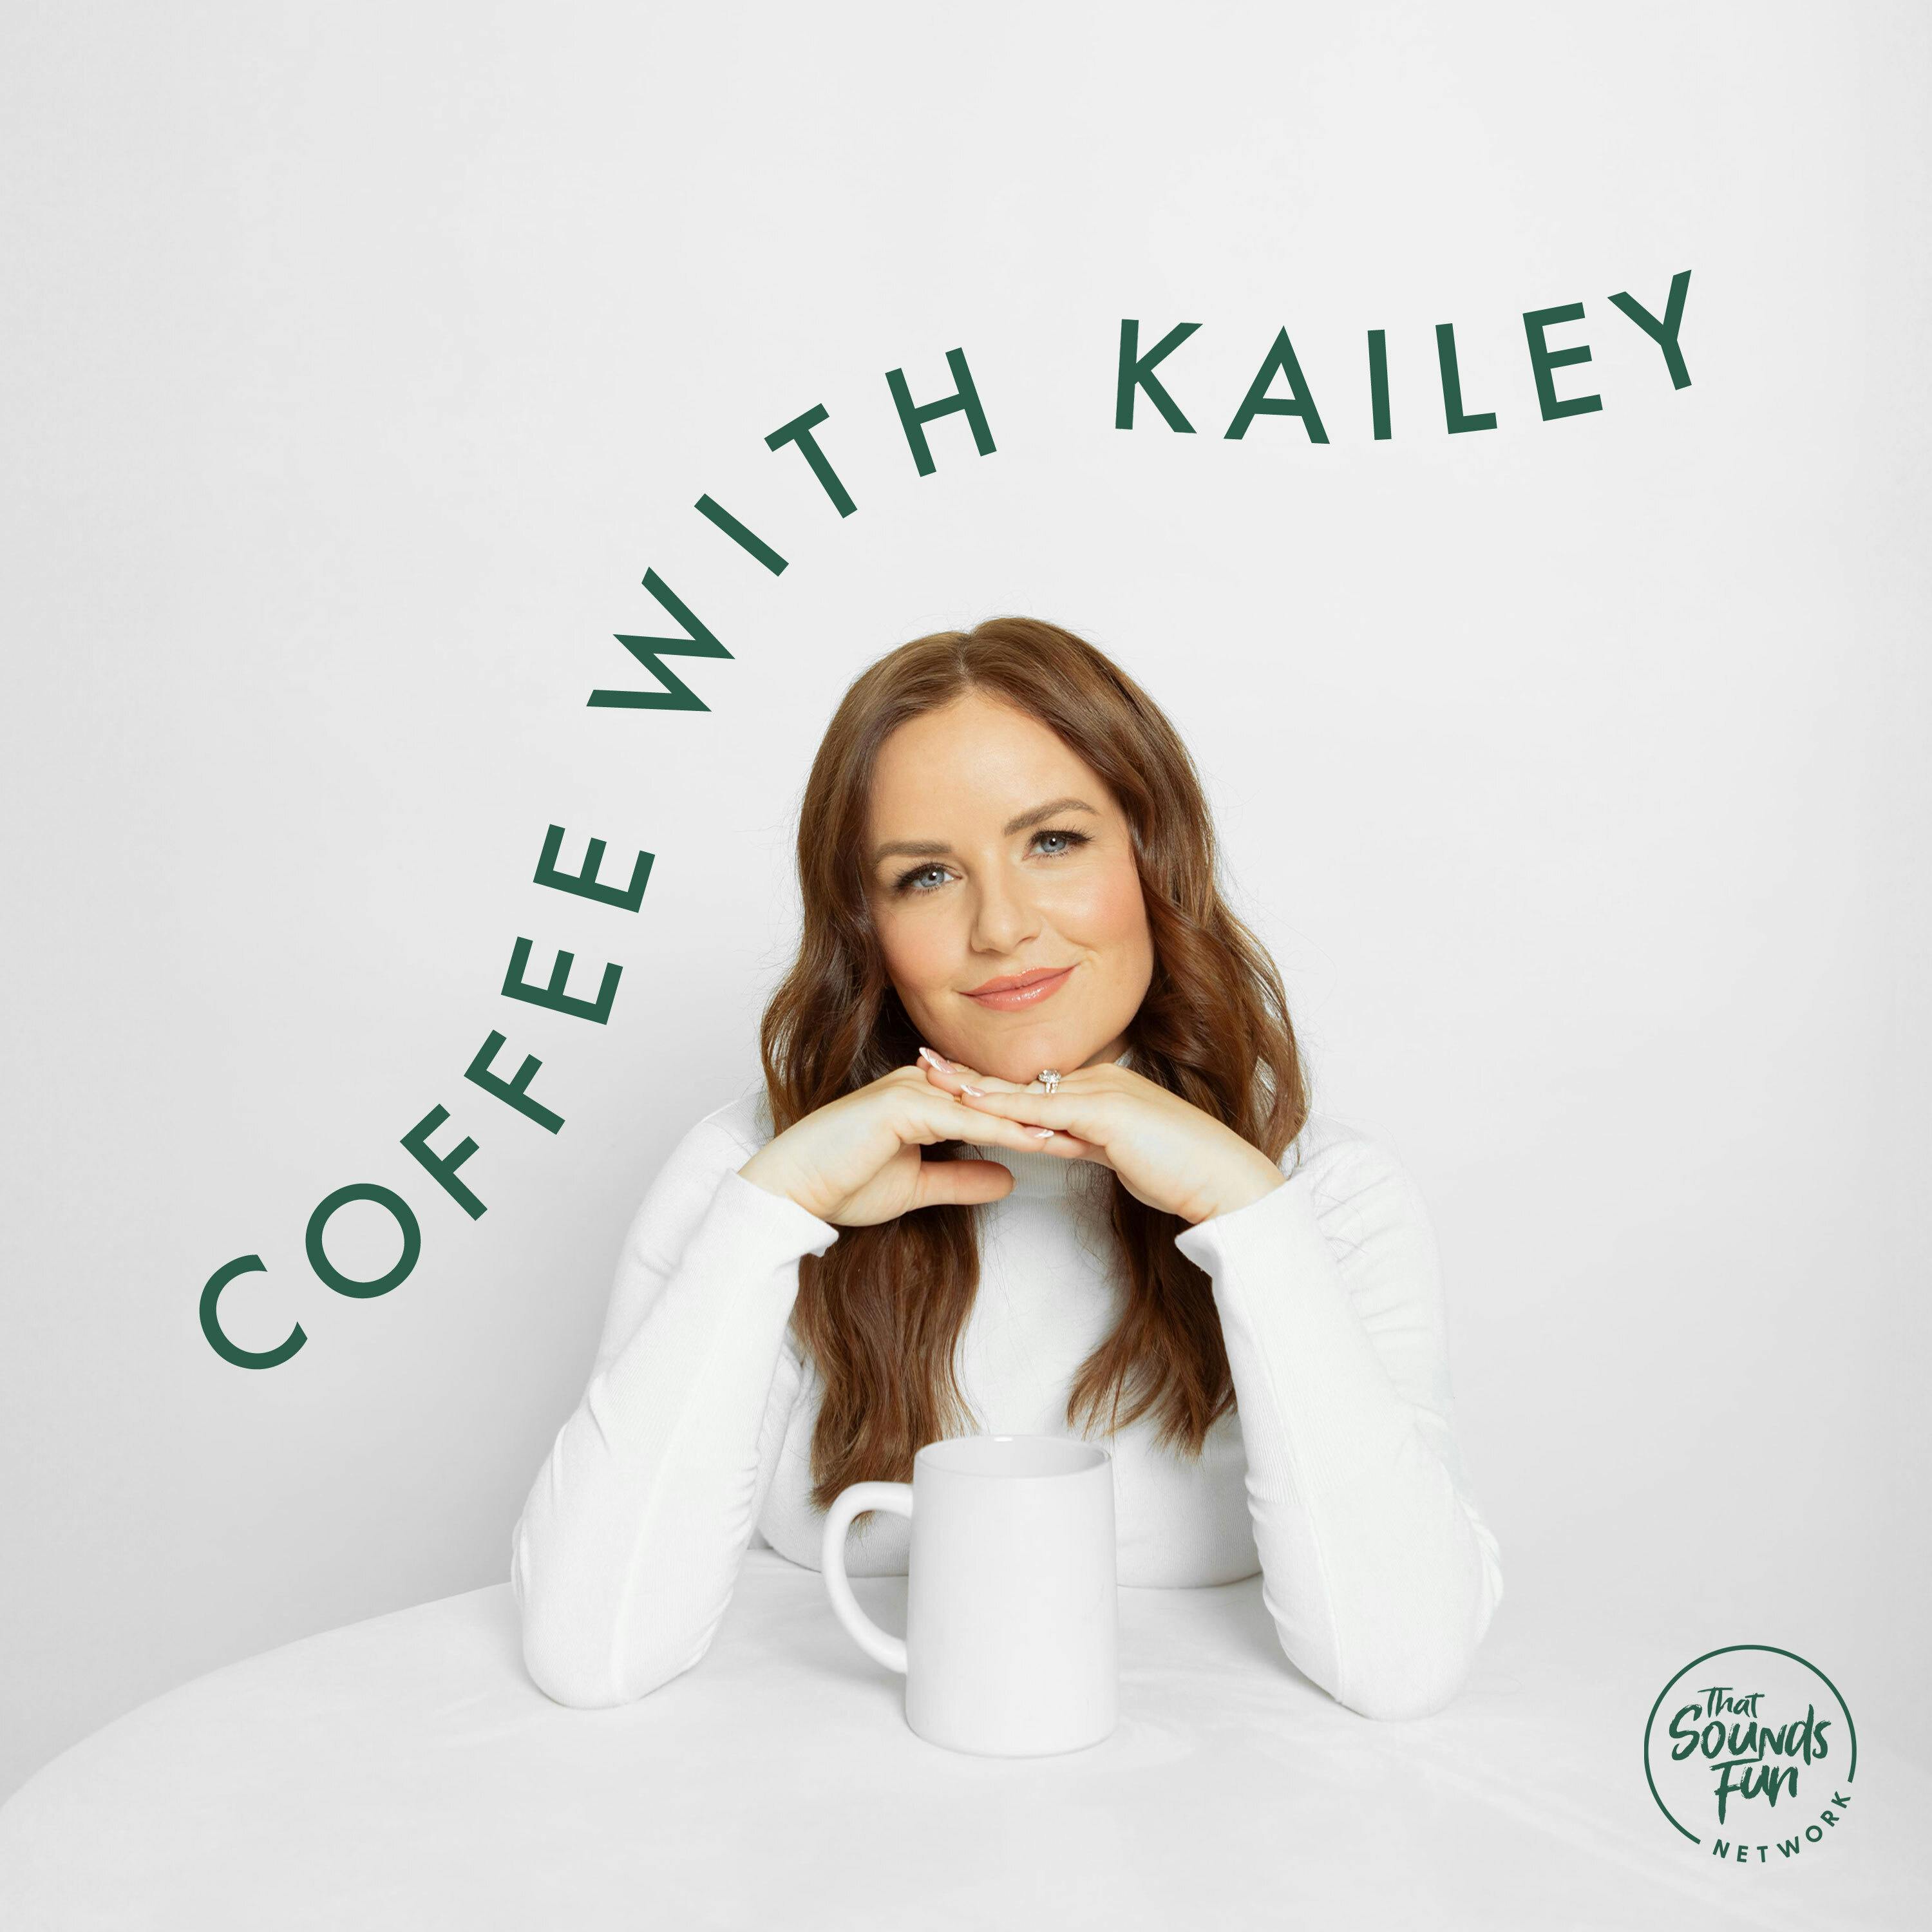 Episode 29: Hannah Brown and Kailey share insight on friendships, relationships, trauma counseling, and excitement for Hannah’s new podcast